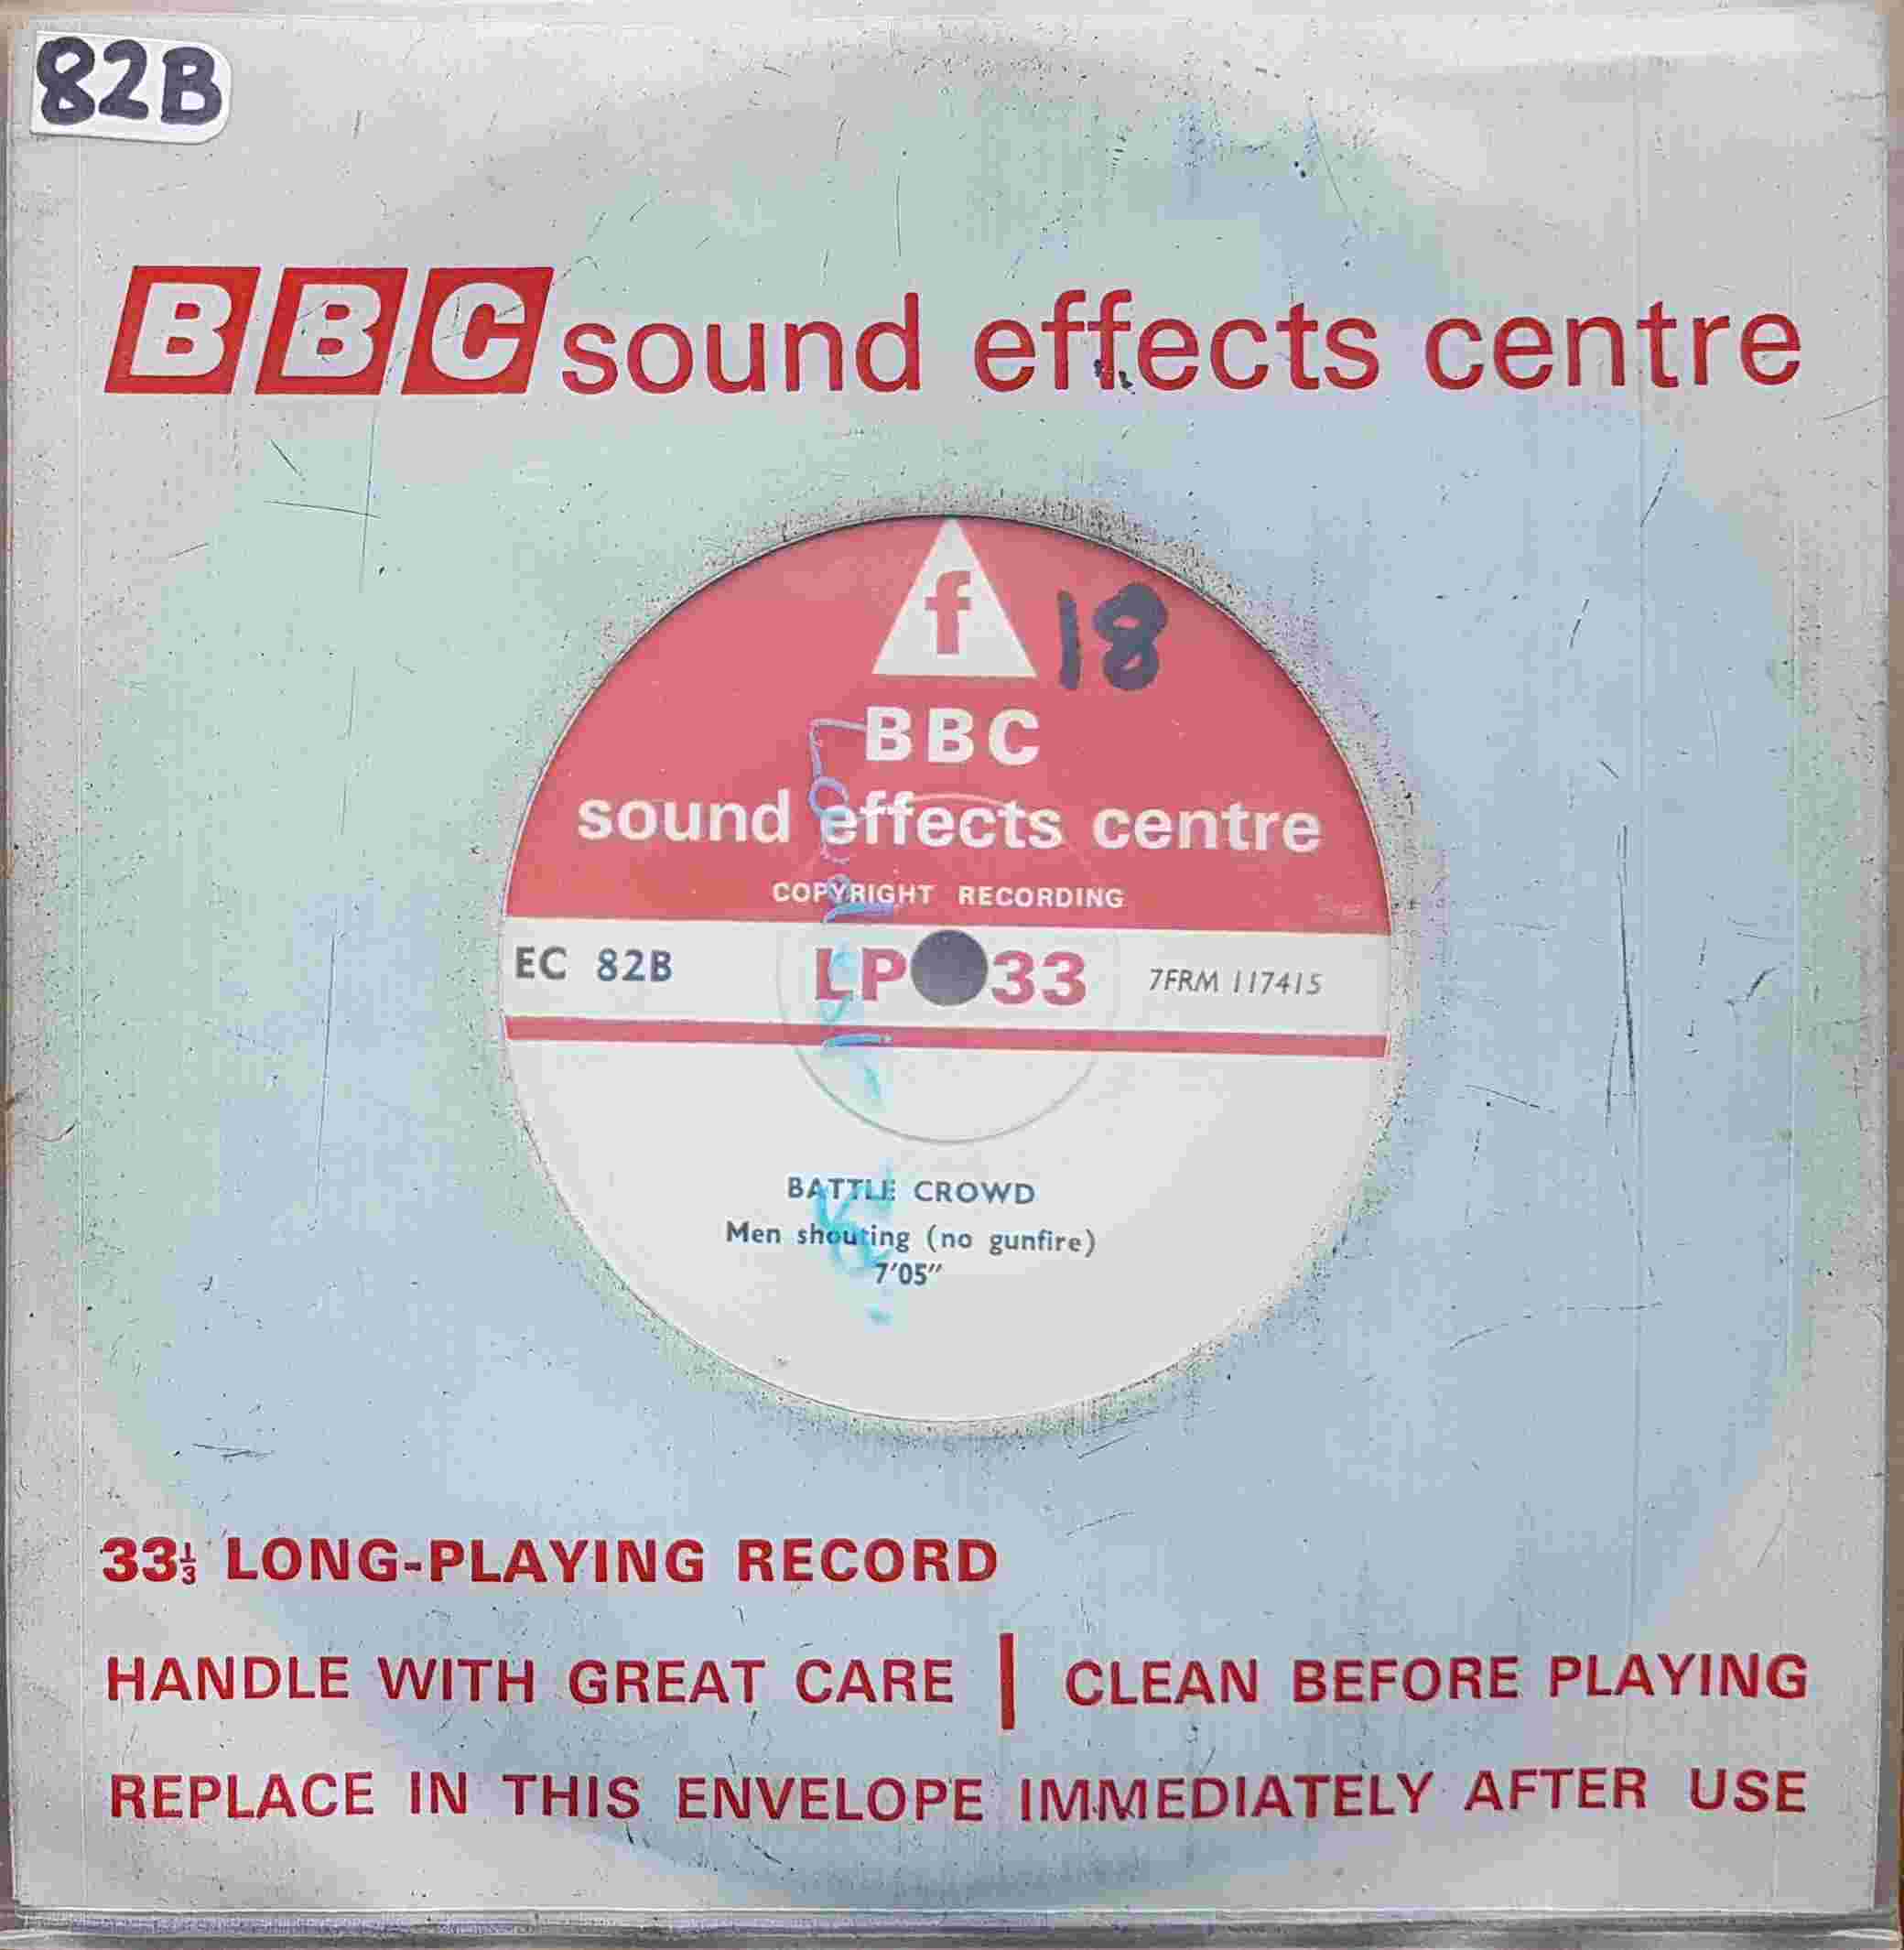 Picture of EC 82B Battle ground by artist Not registered from the BBC records and Tapes library